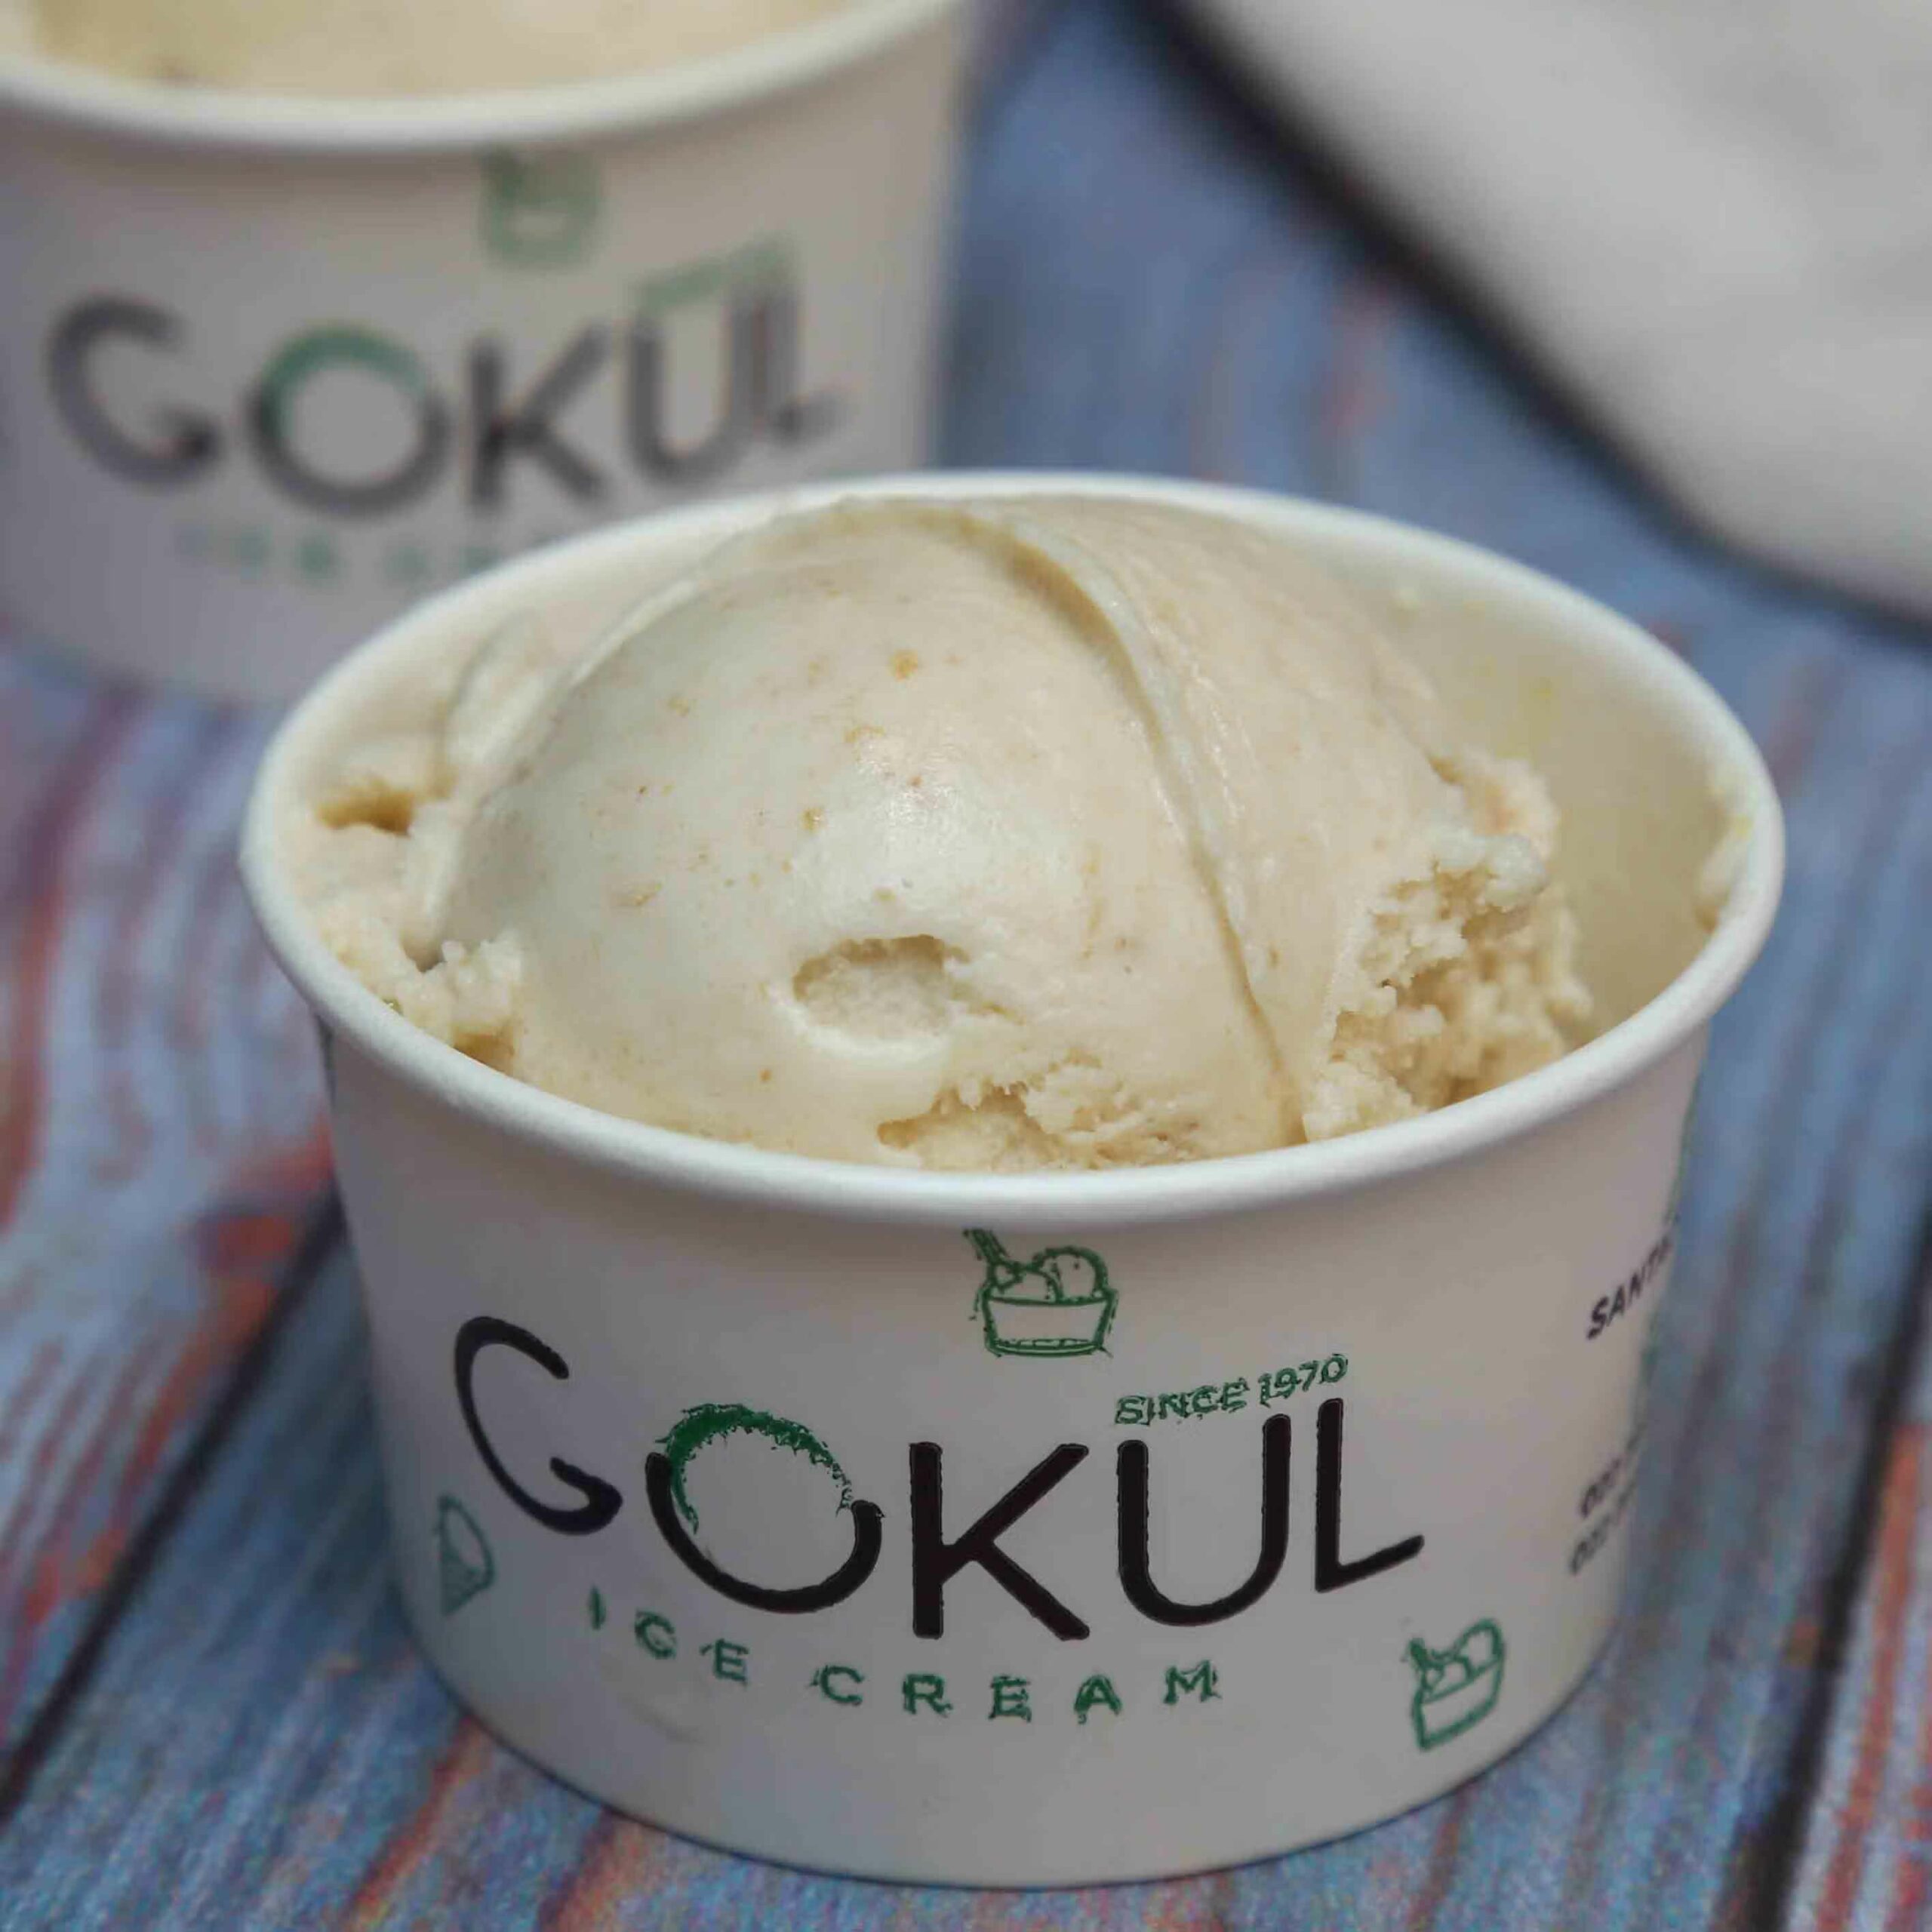 The Gokul ice cream is popular for the consistency in taste the brand has maintained since 1970,